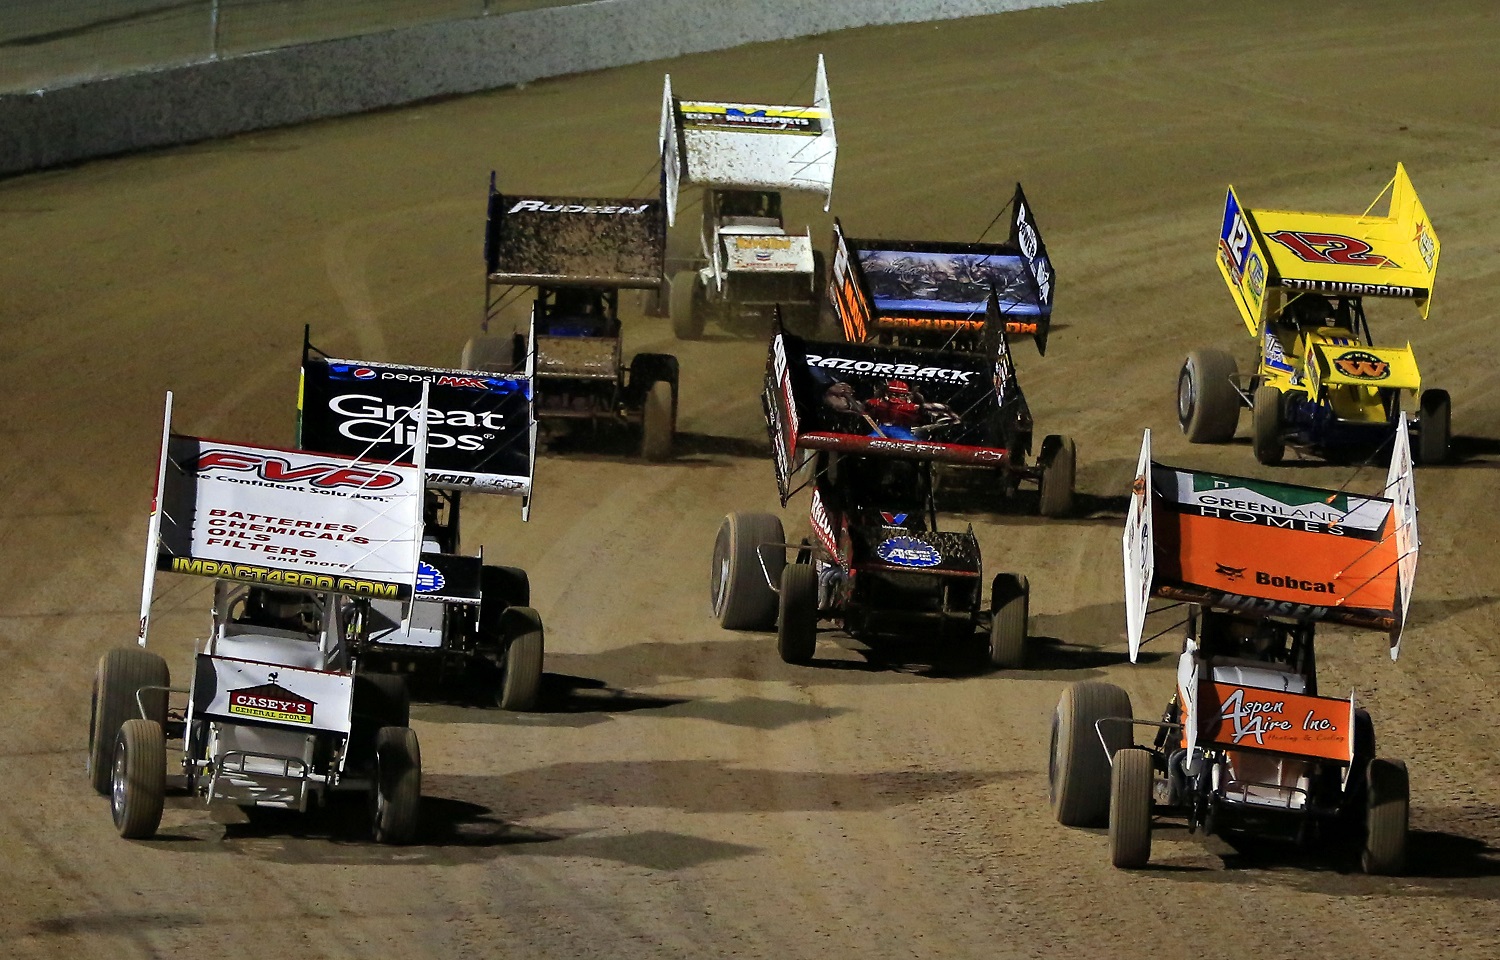 The World Of Outlaws Sprint Car FVP Outlaw Showdown at the Dirt Track at Las Vegas Motor Speedway in March 2015. | Tami Pope/Icon SMI/Corbis/Icon Sportswire via Getty Images